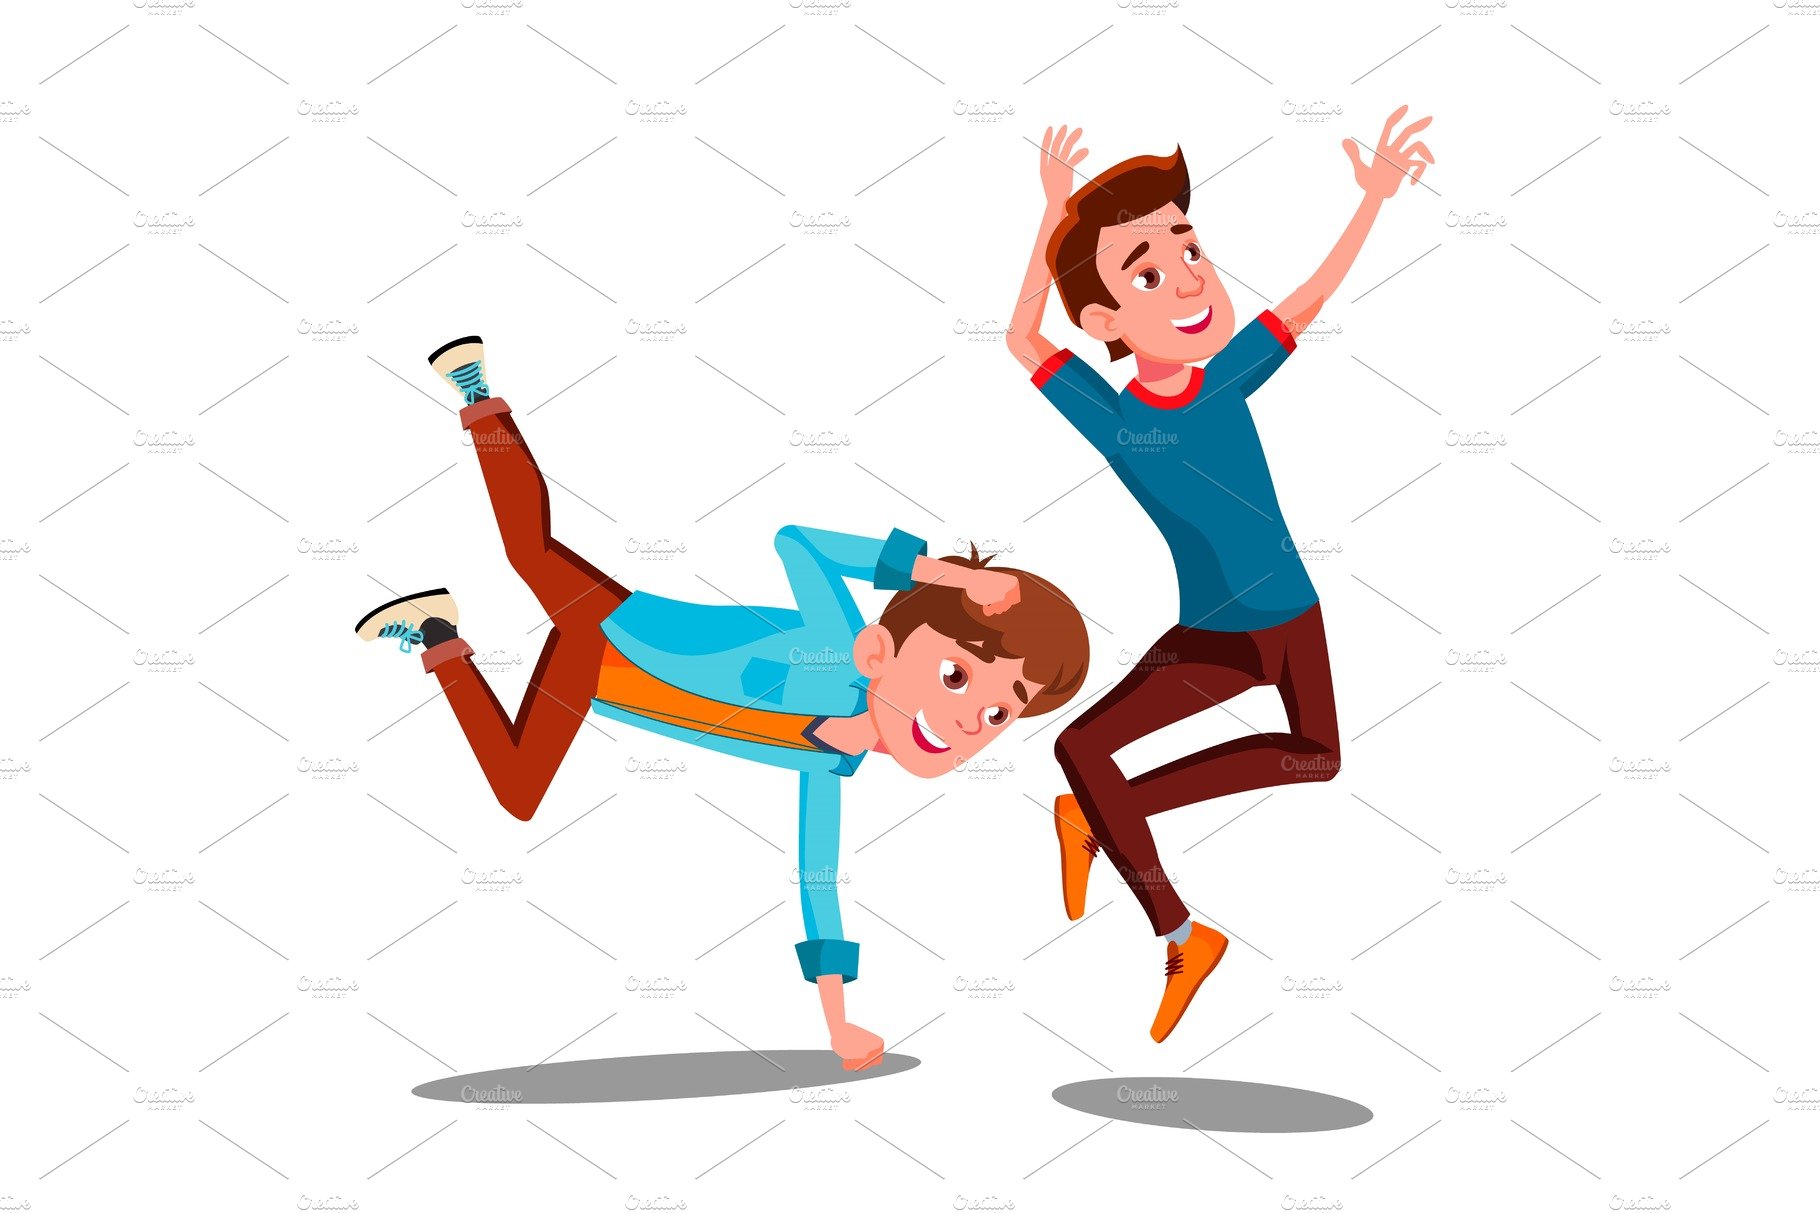 Two Boys Dancing Break On Arms cover image.